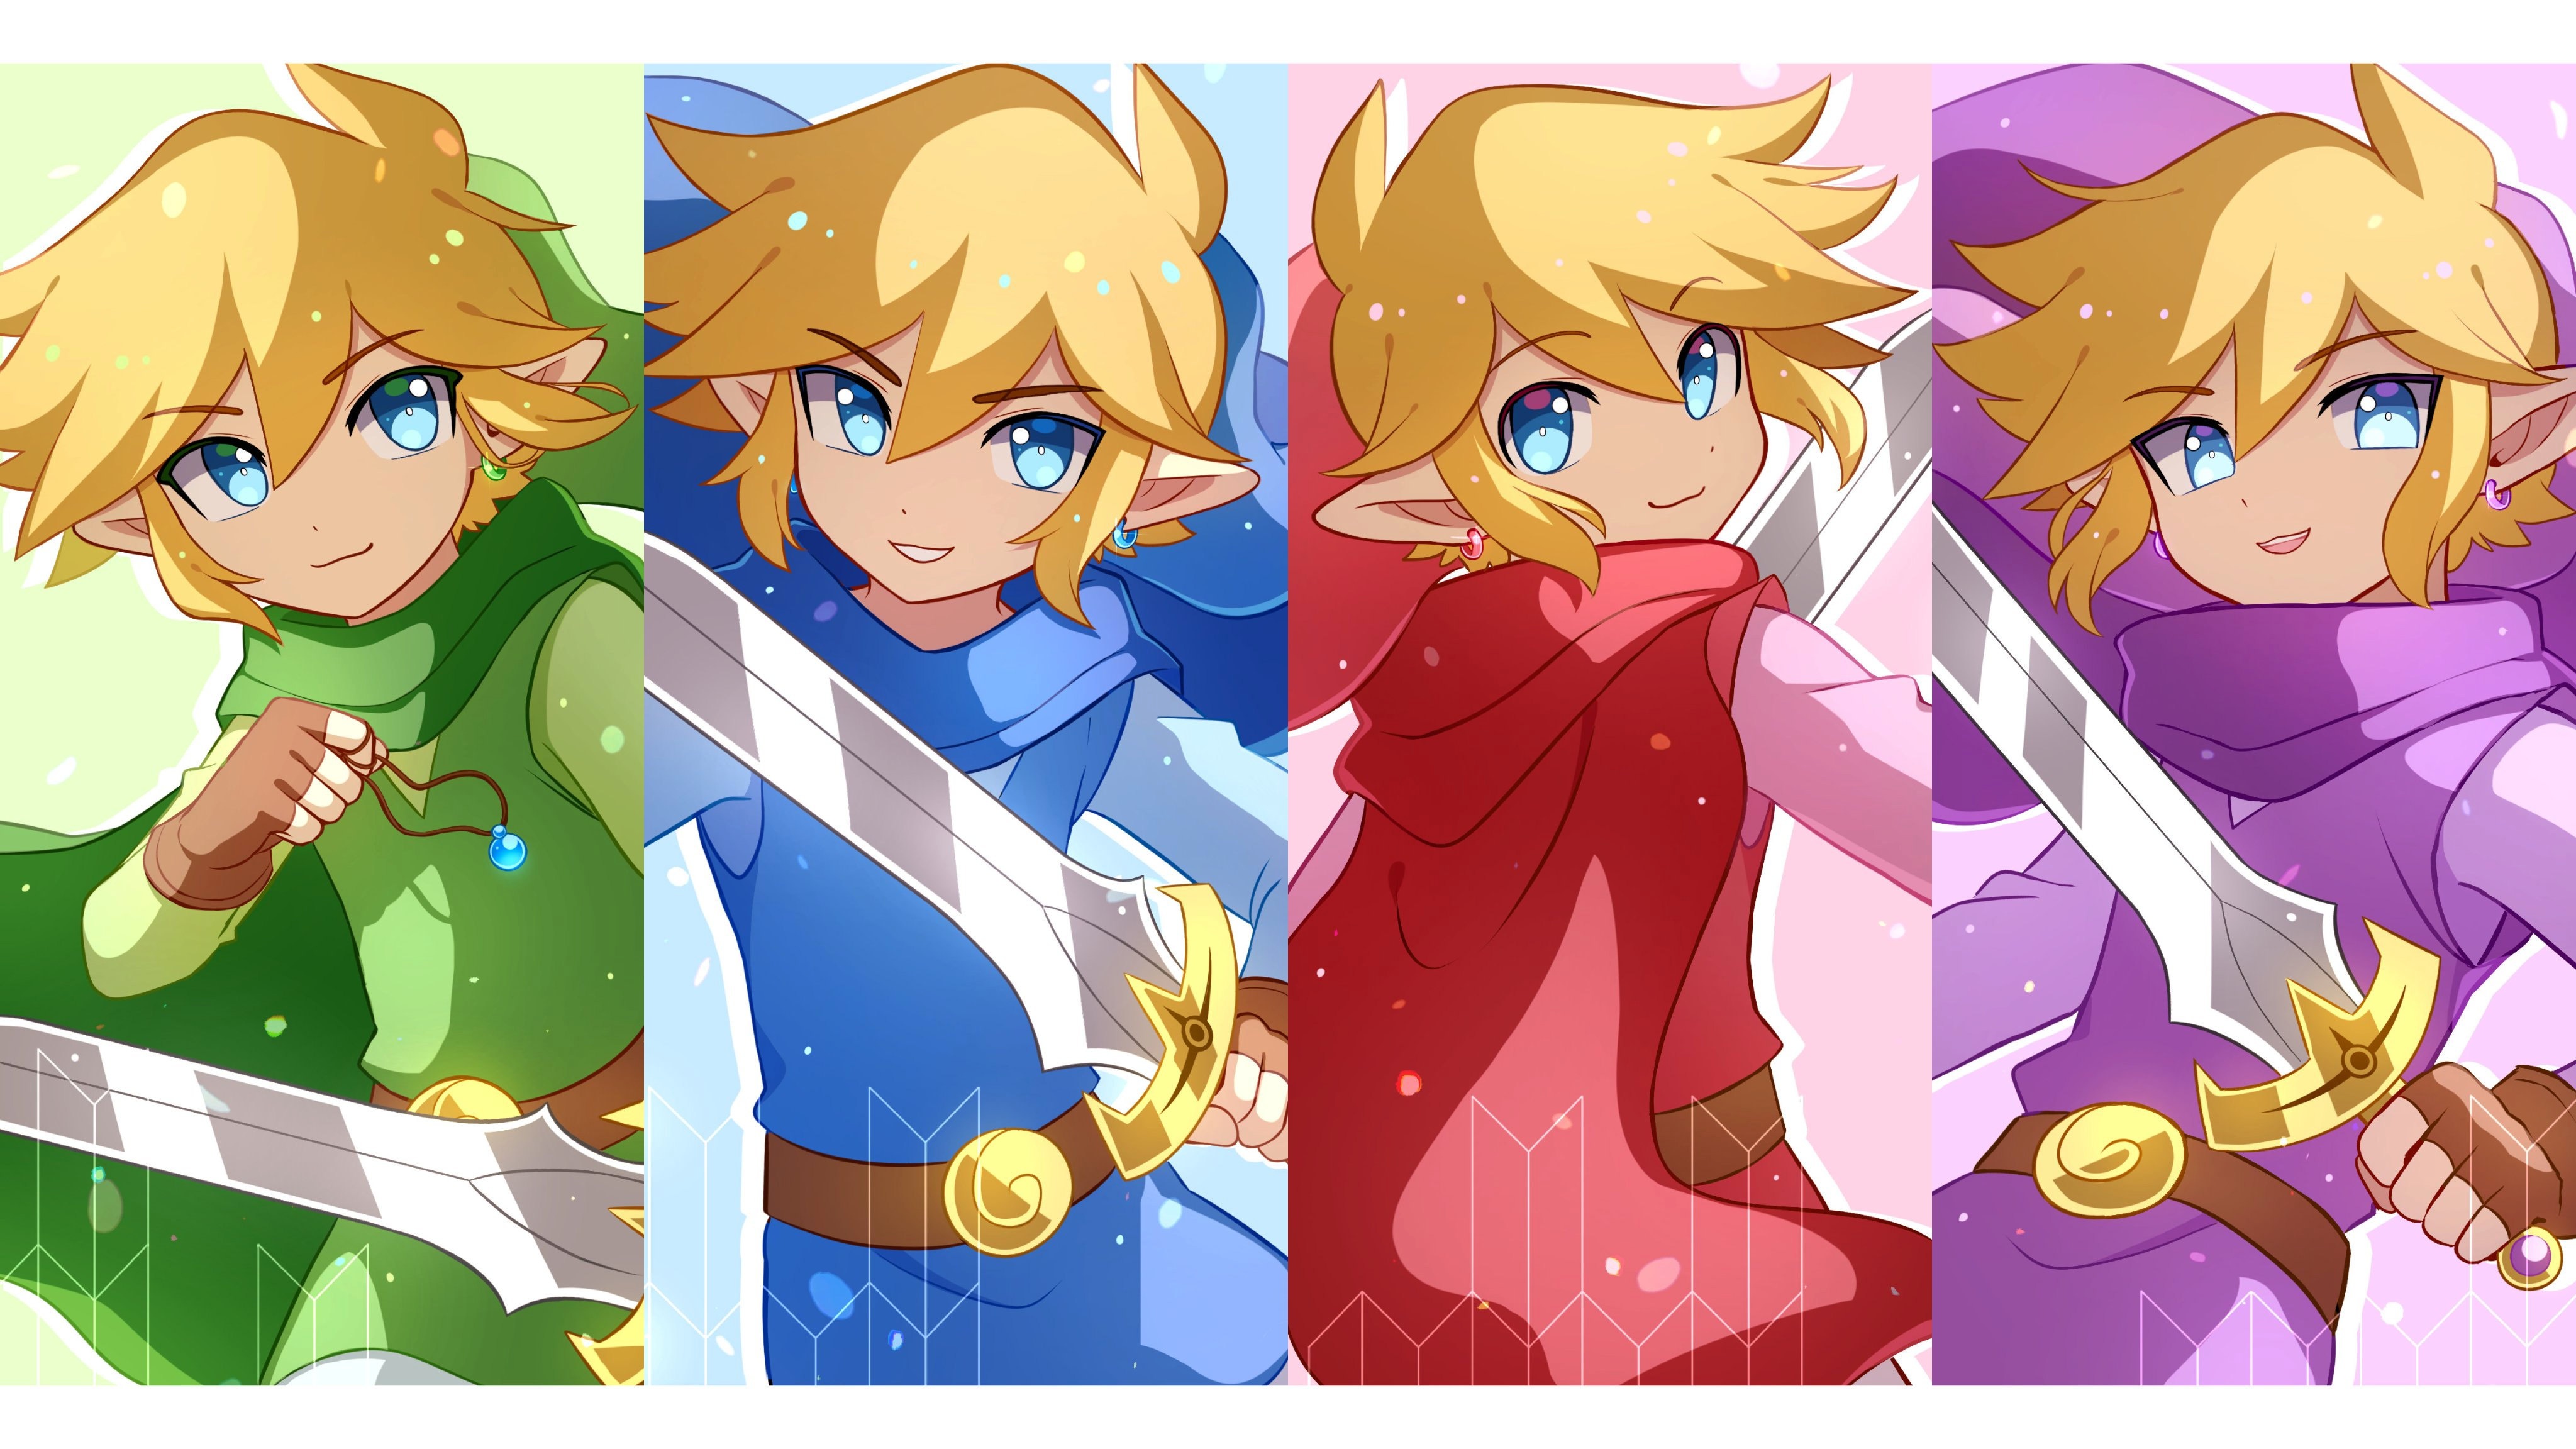 Anime 4096x2304 video games sword pointy ears Tunic green tunic blonde short hair hat blue eyes weapon cape gloves Nintendo bangs Link The Legend of Zelda